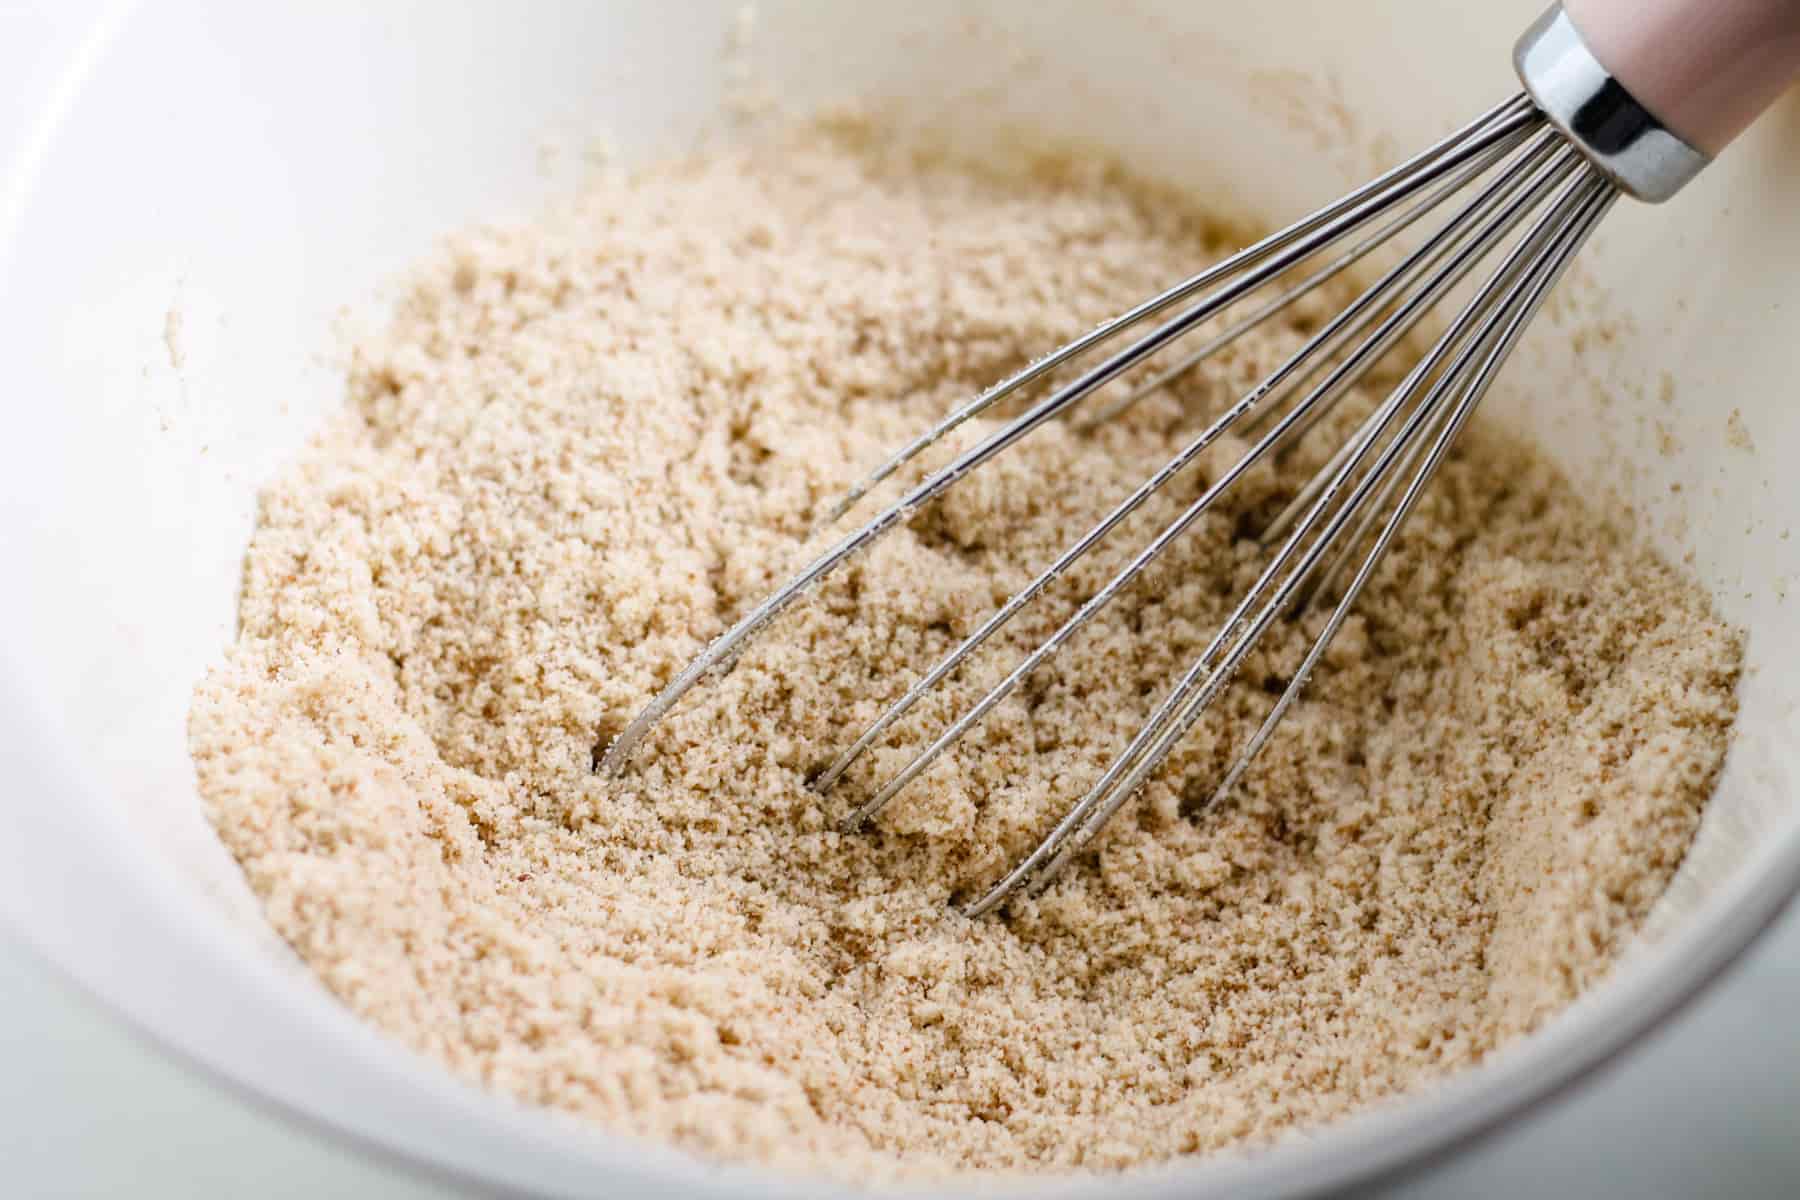 dry ingredients being whisked in a mixing bowl.